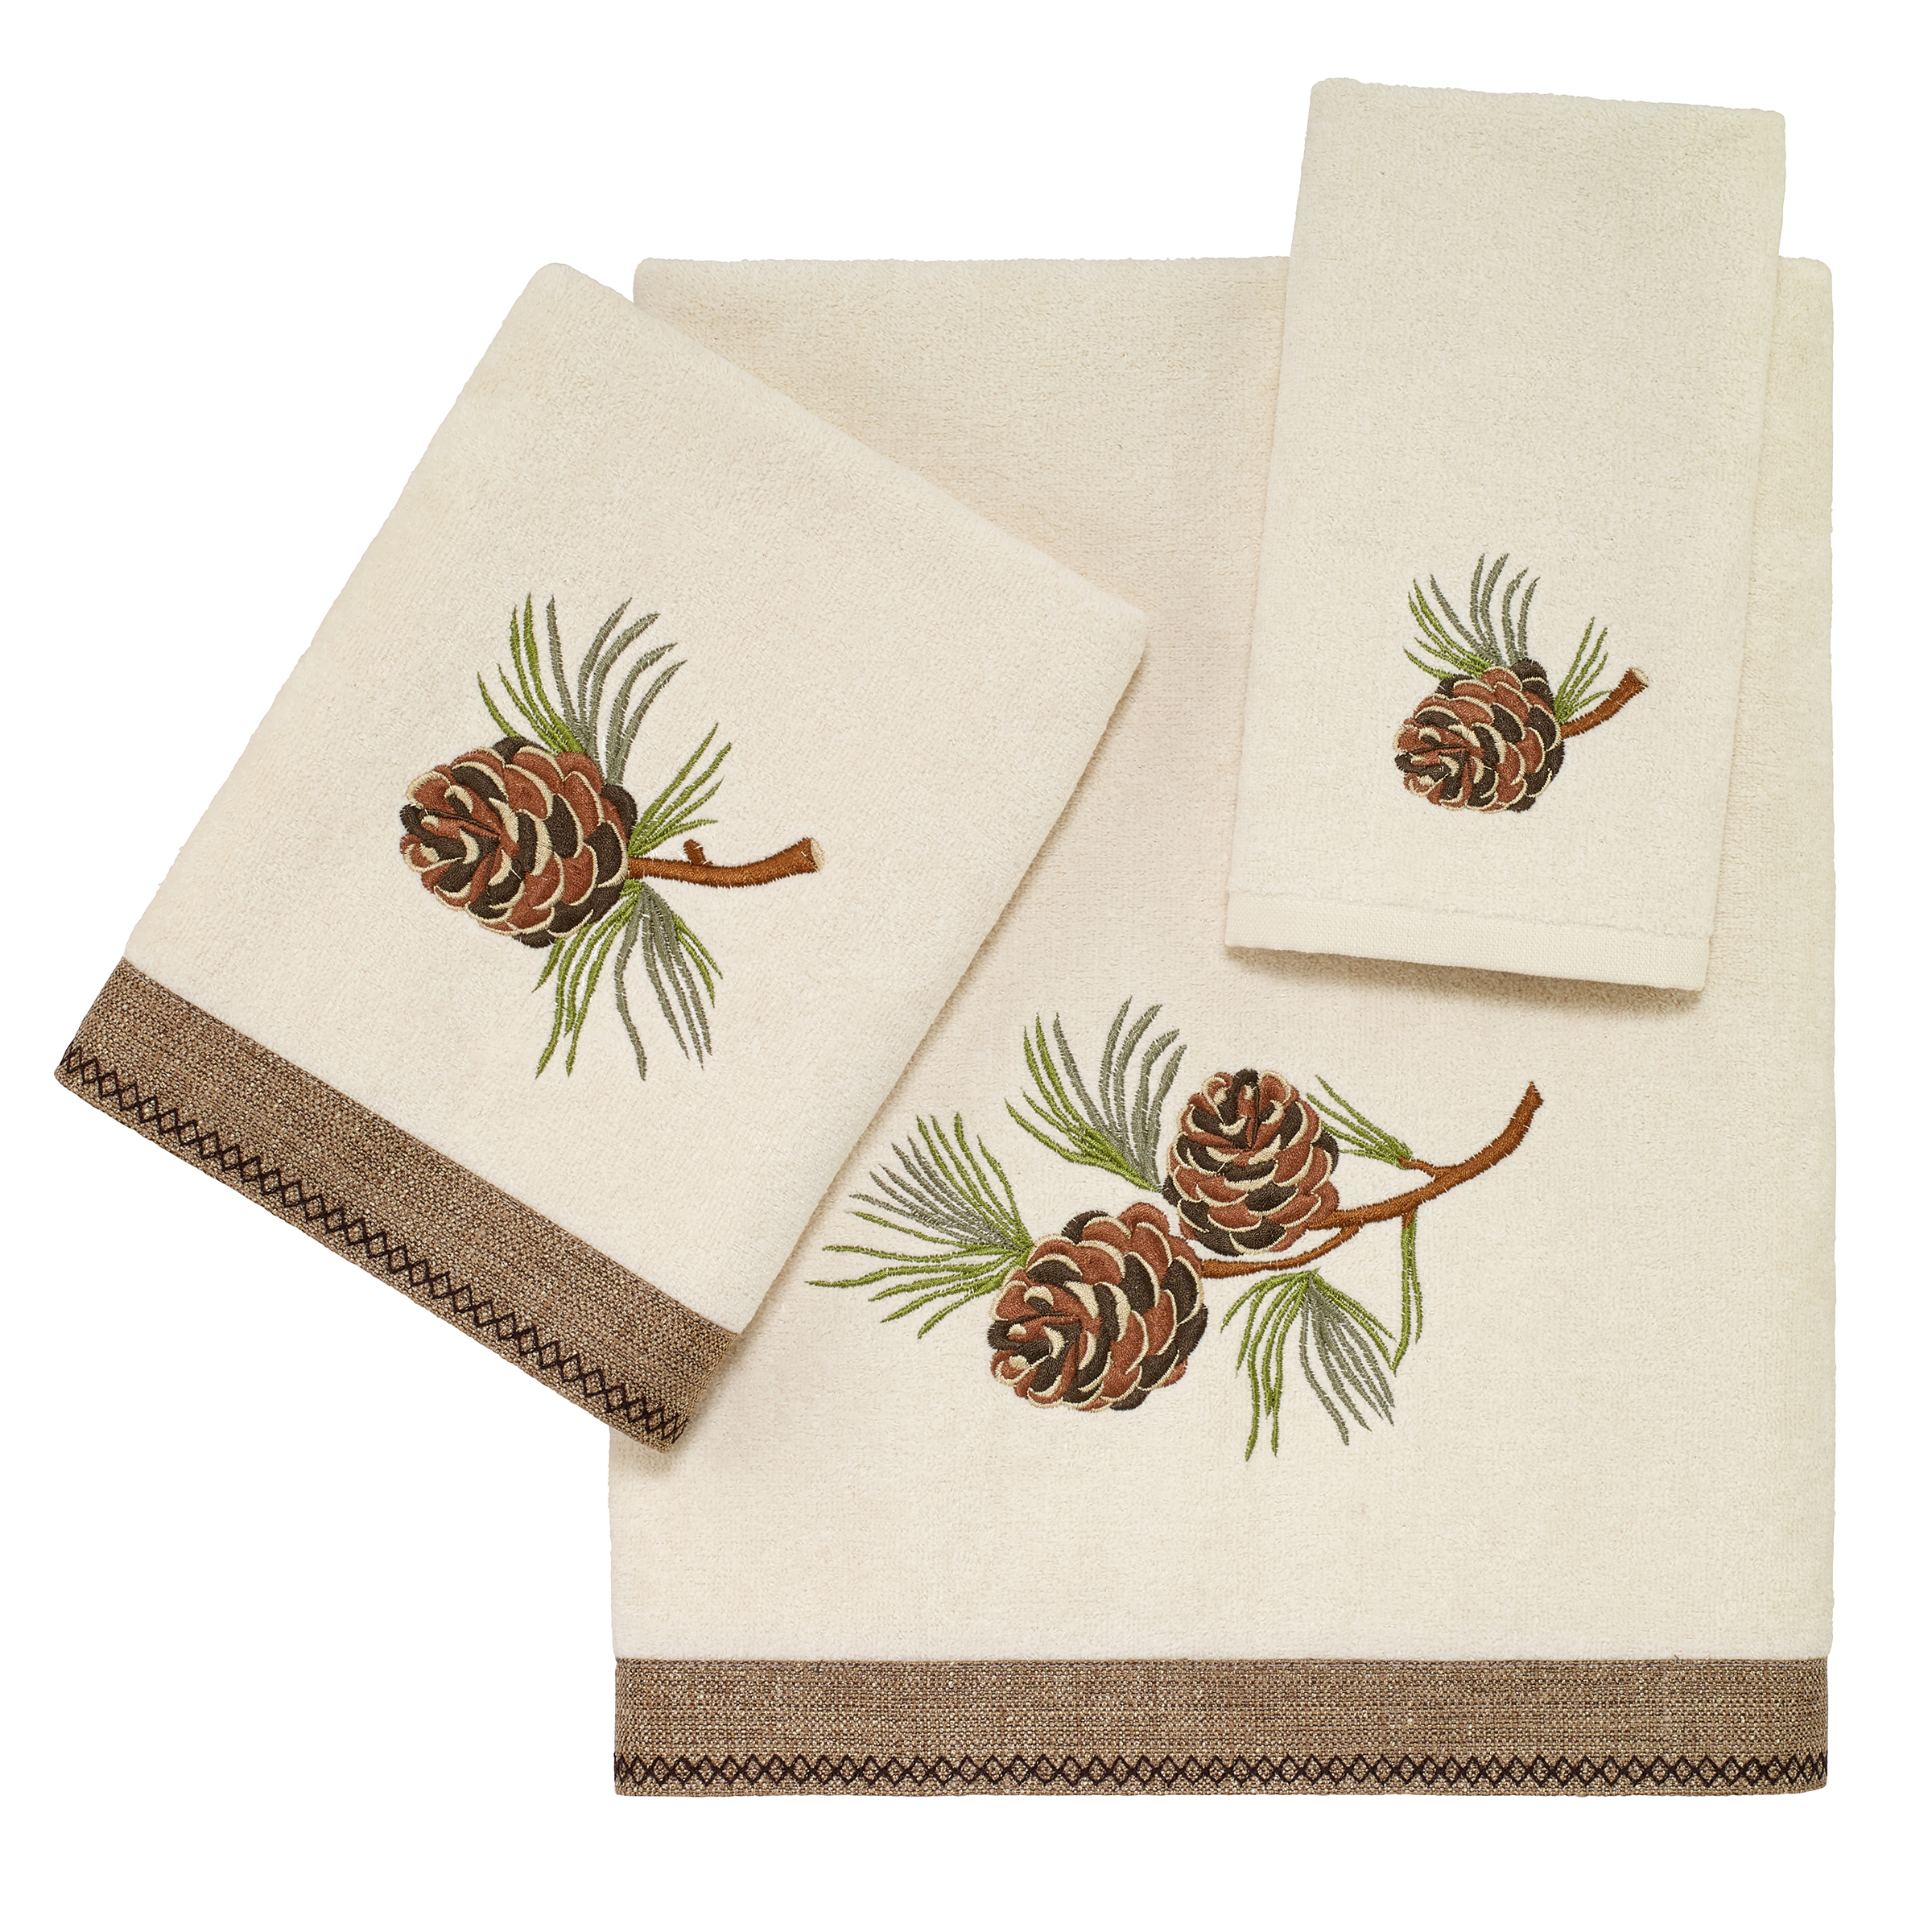 https://www.thecabinshop.com/media/catalog/product/p/i/pine_valley_spring_2021-towelcollection_5.jpg